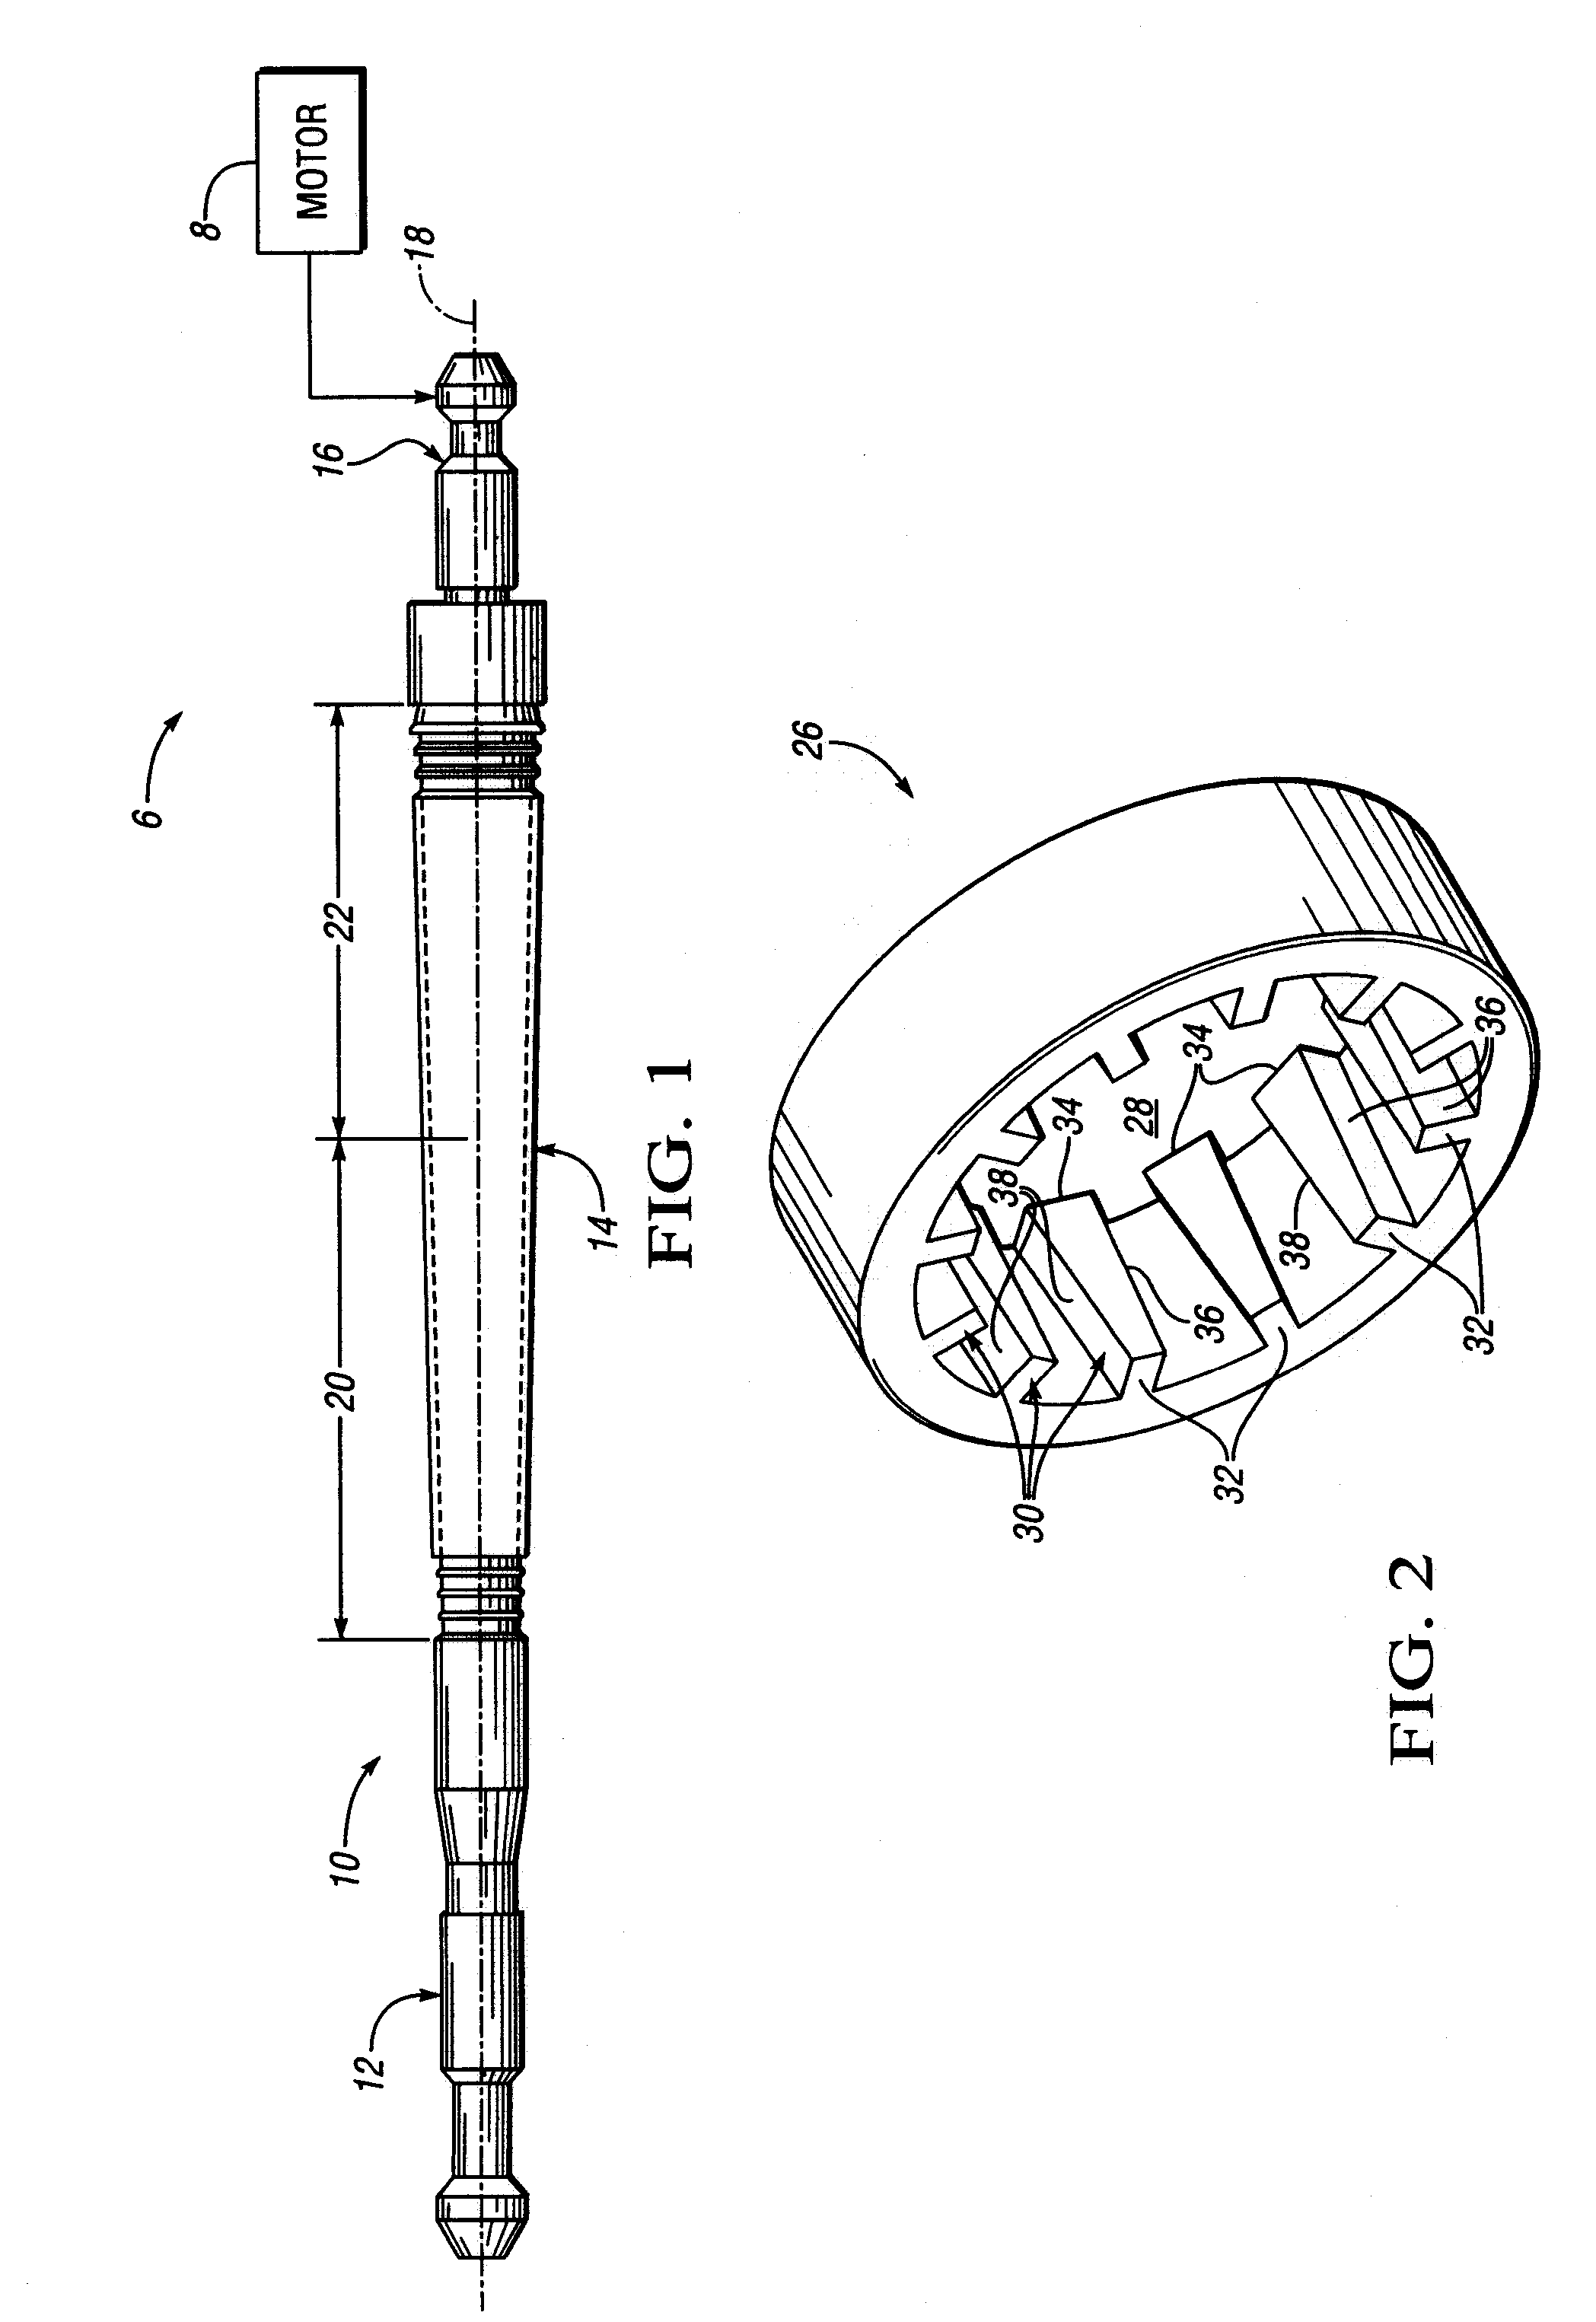 Broaching apparatus and method for producing a gear member with tapered gear teeth